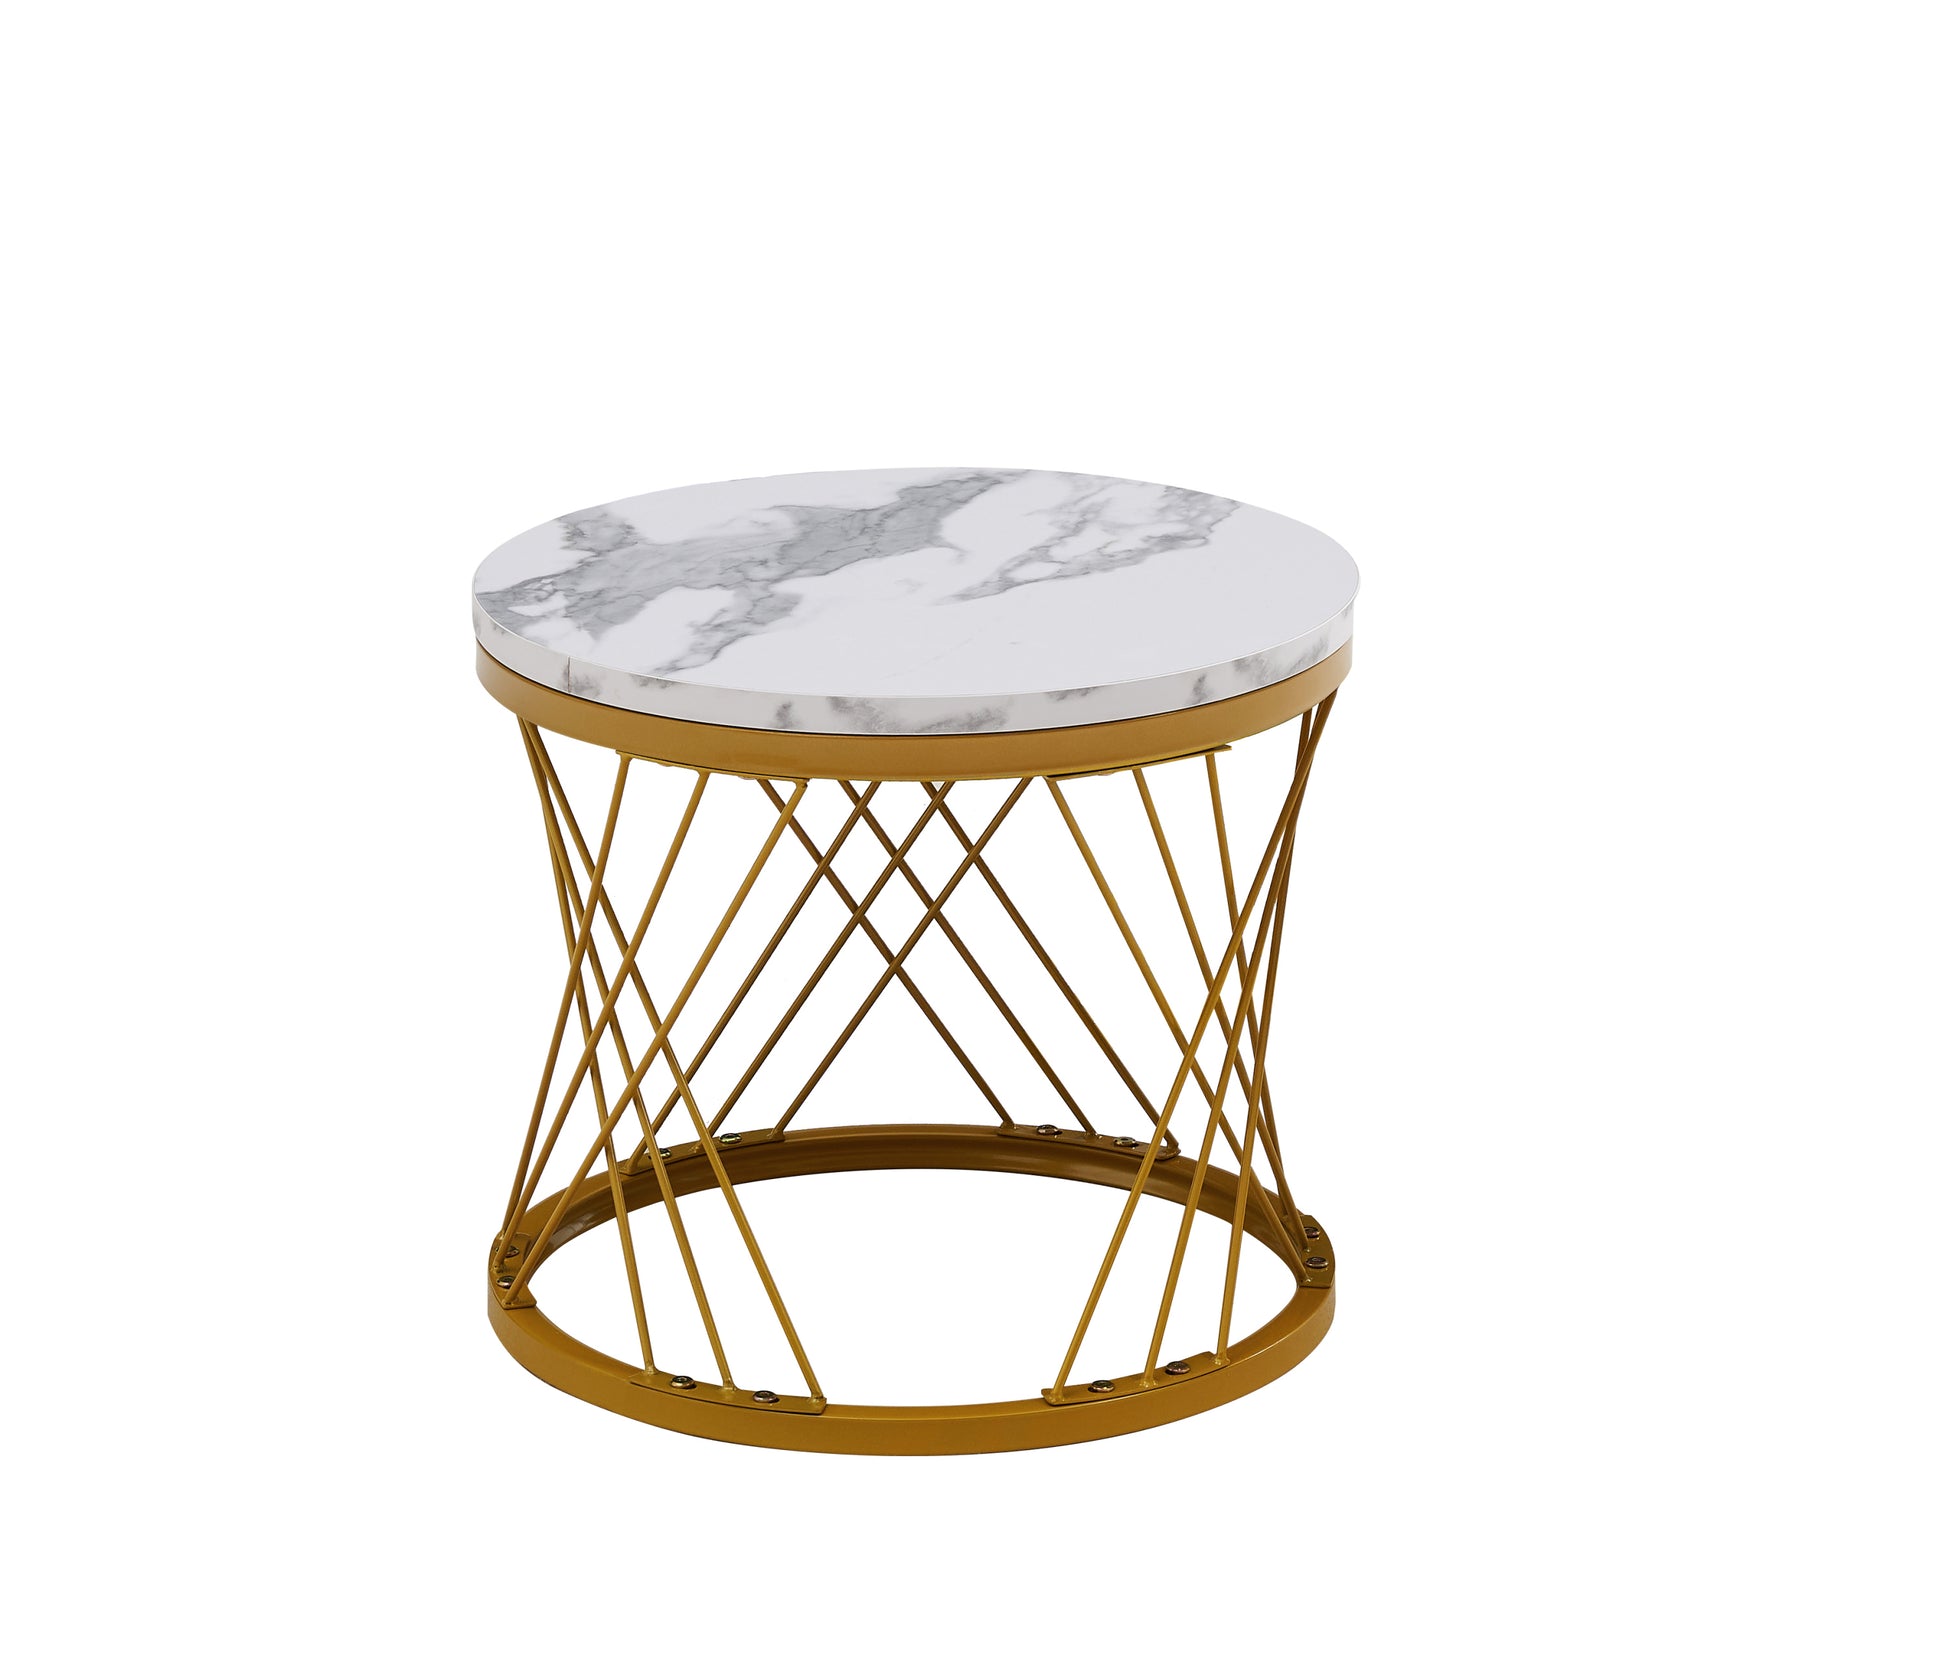 Modern Minimalist Nesting Coffee Table for Living Room - Wooden Top and Metal Legs - Enova Luxe Home Store